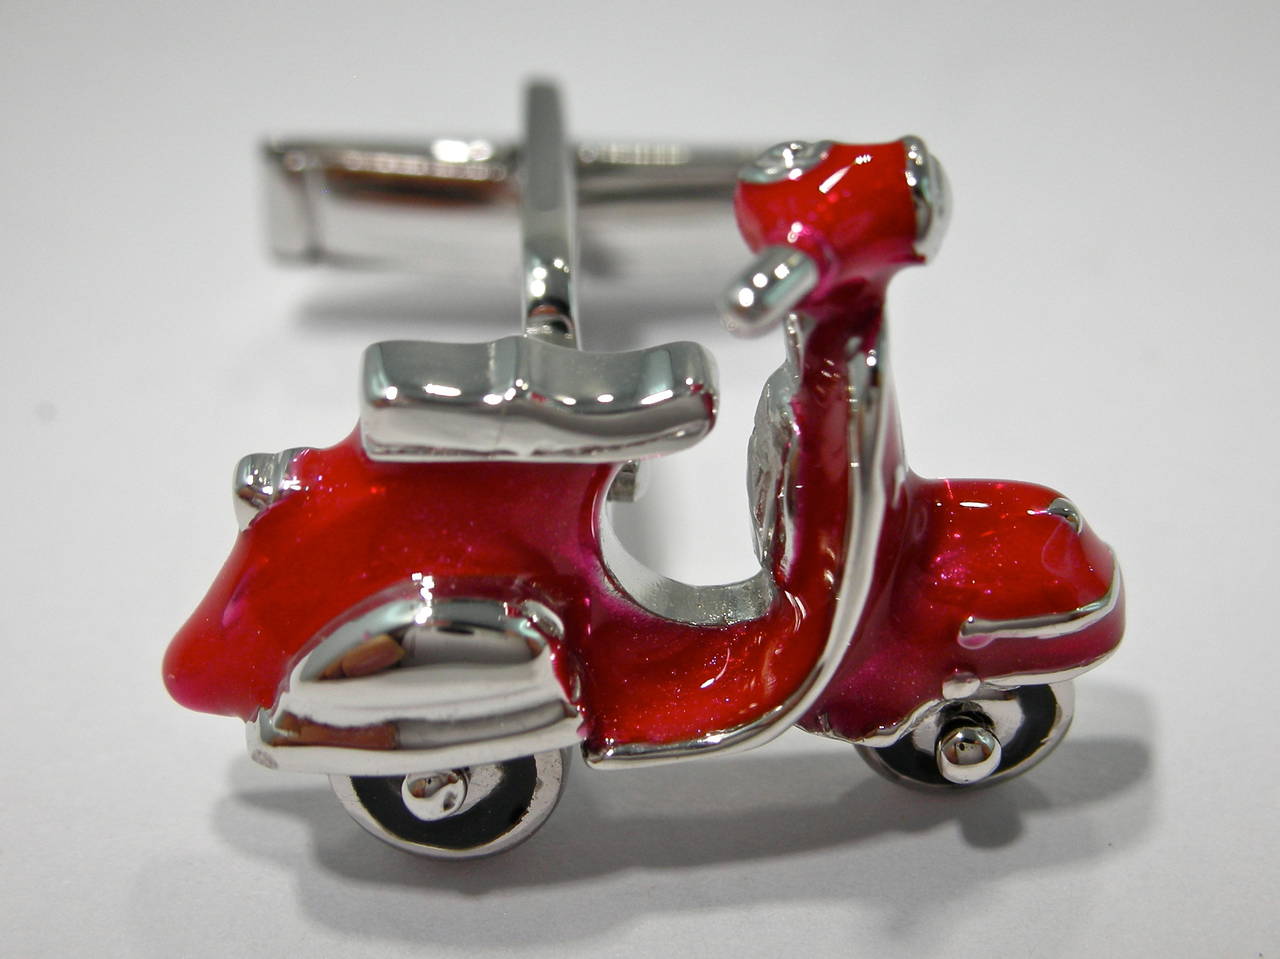 Jona enameled sterling silver scooter cufflinks with rotating wheels; are available in six different colors or plane rhodium plated.
Dimensions: H 1.66 in x W 0.90 in x D 0.20 in - H 23.05 mm x W 23.05 mm X D 5.17 mm.
All Jona jewelry is new and has